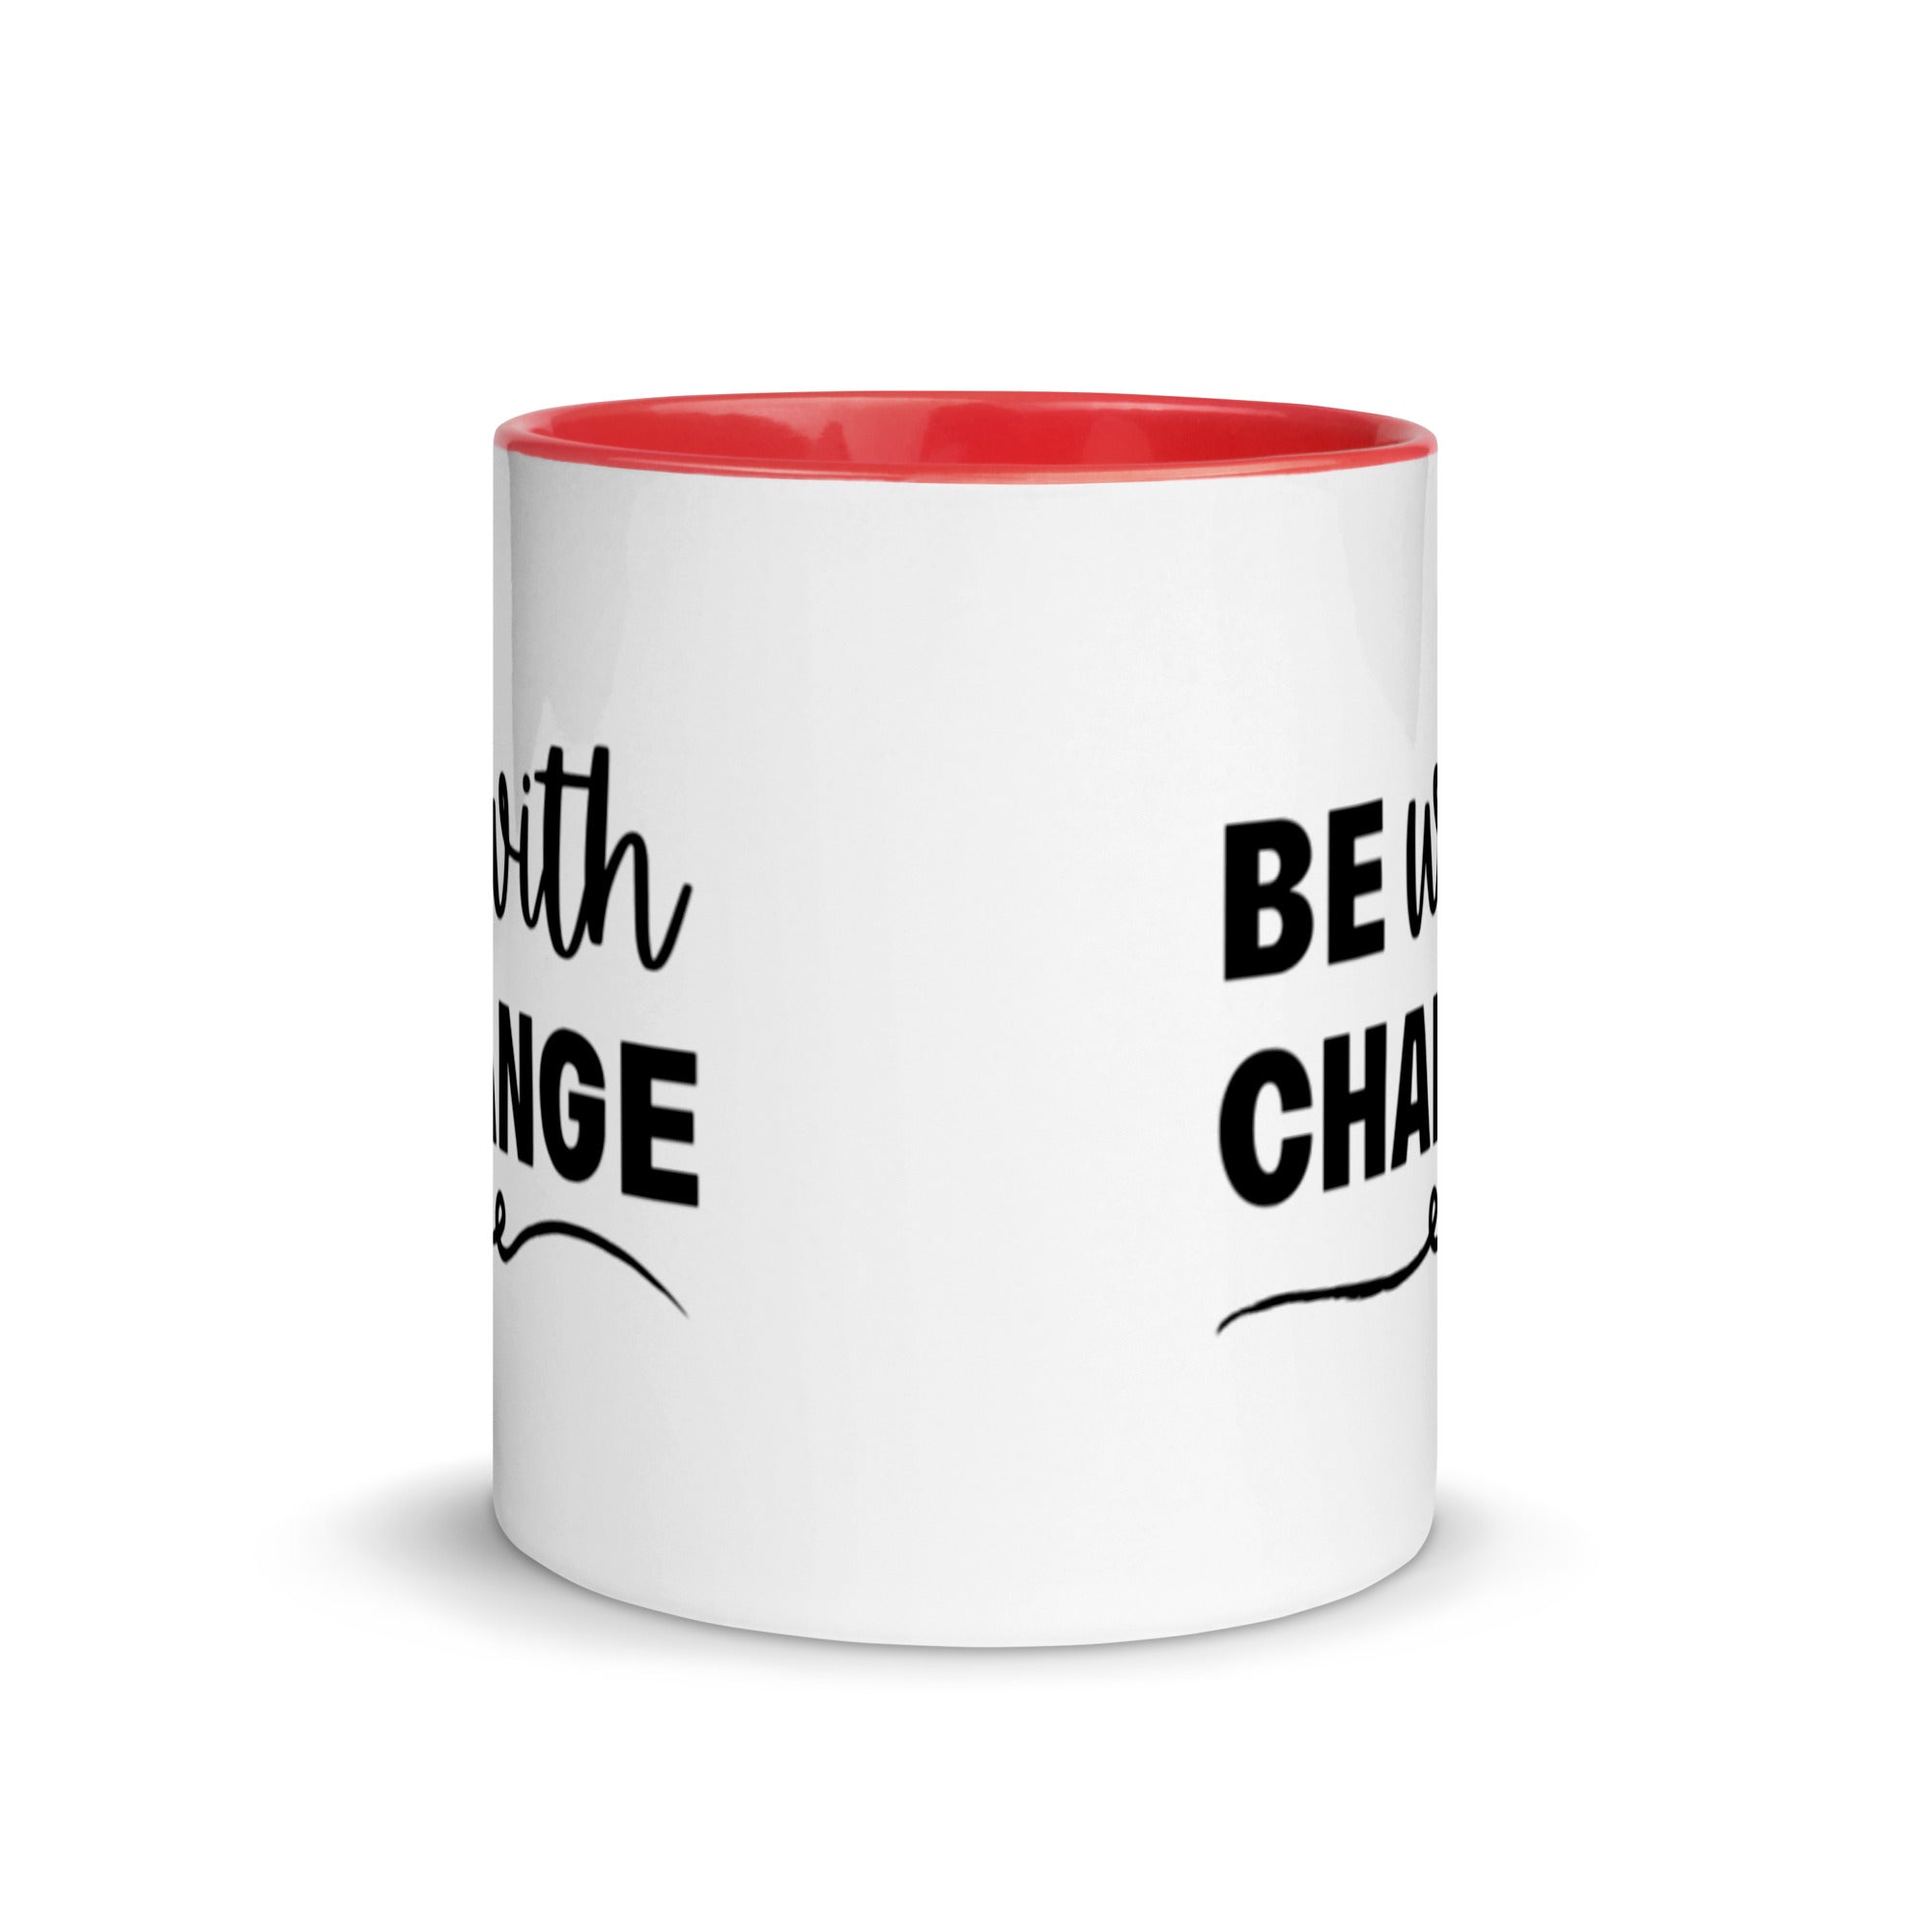 Be With Change - Mug with Color Inside